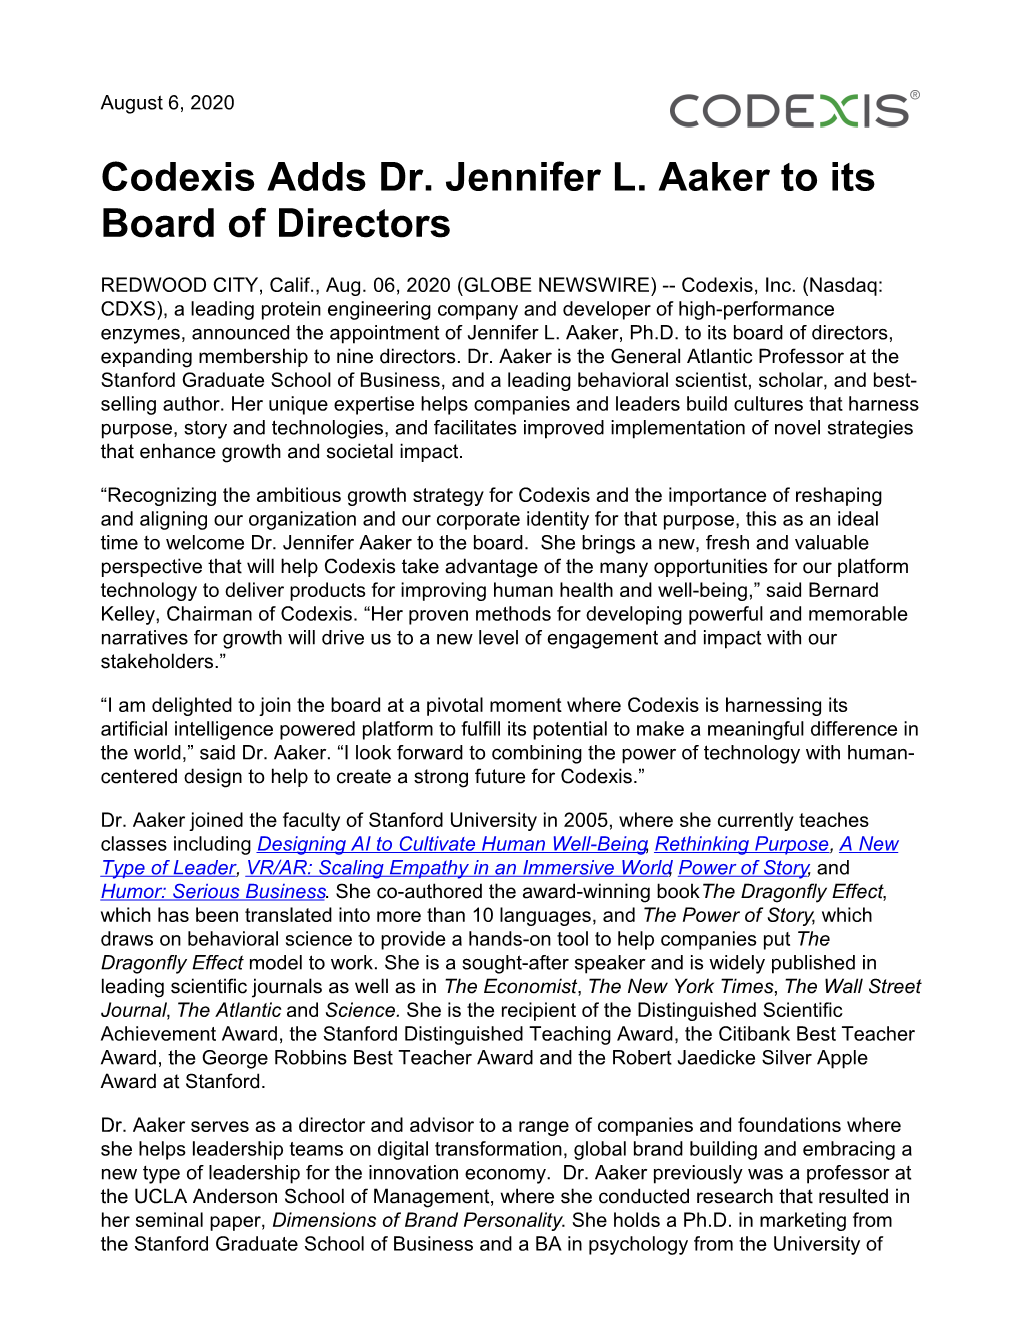 Codexis Adds Dr. Jennifer L. Aaker to Its Board of Directors